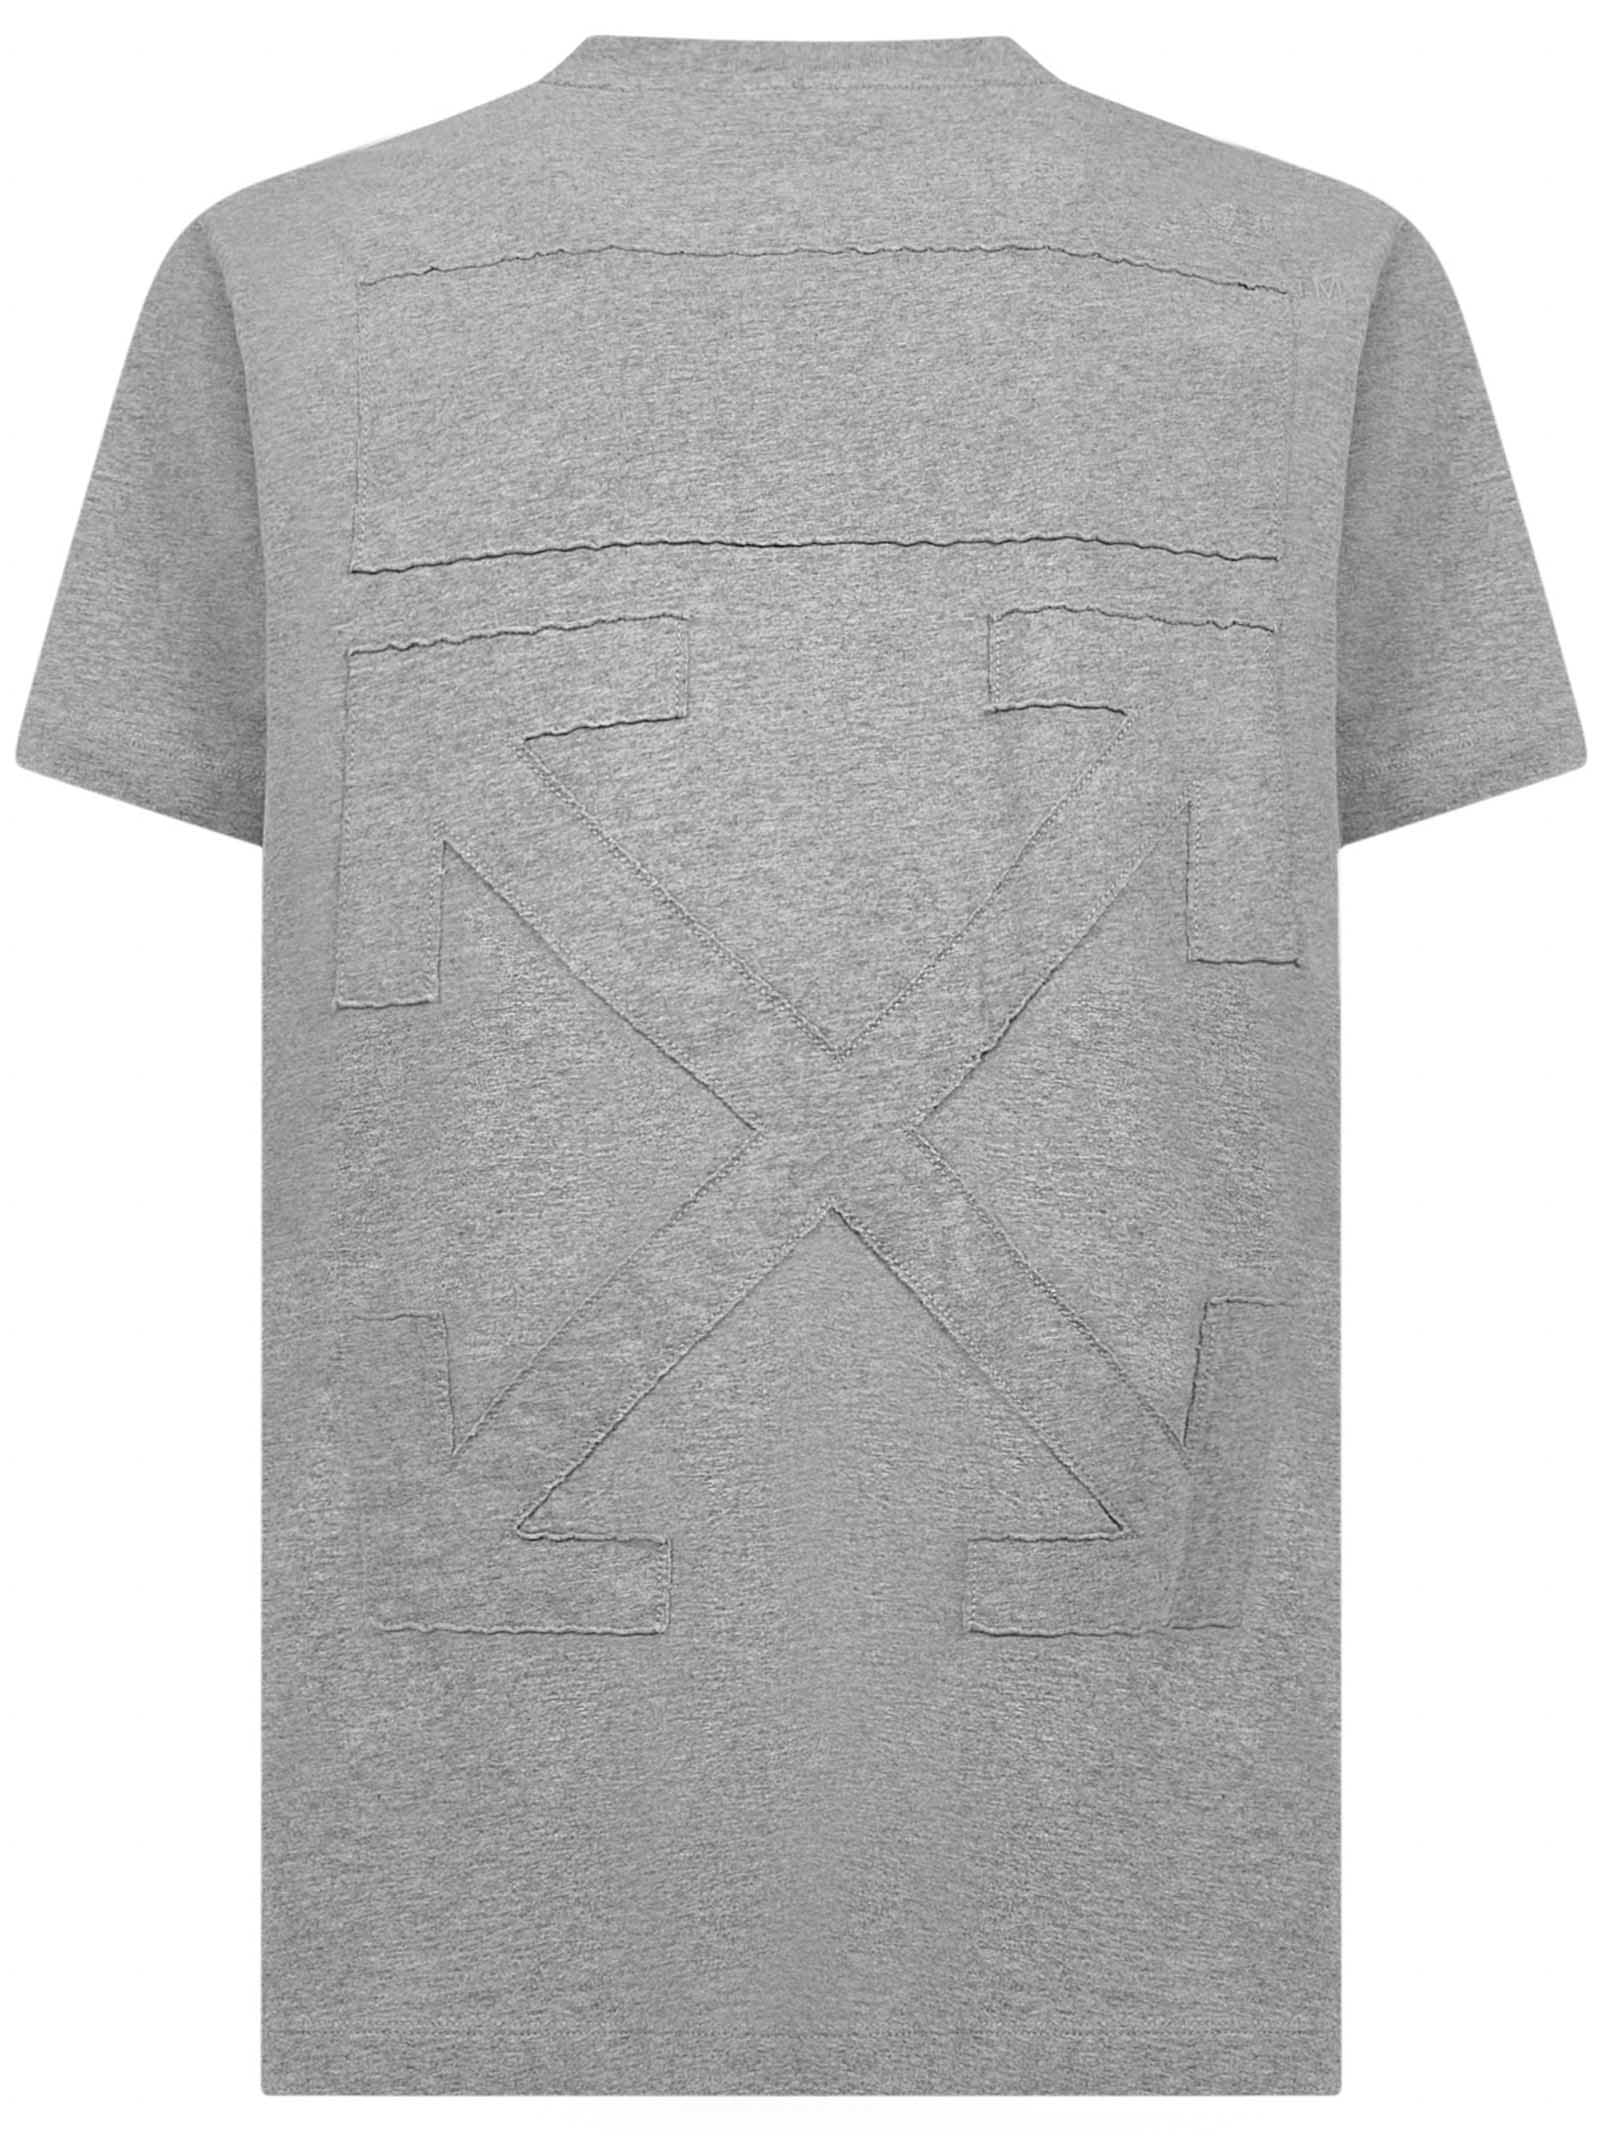 Off-white T-shirt In Grey